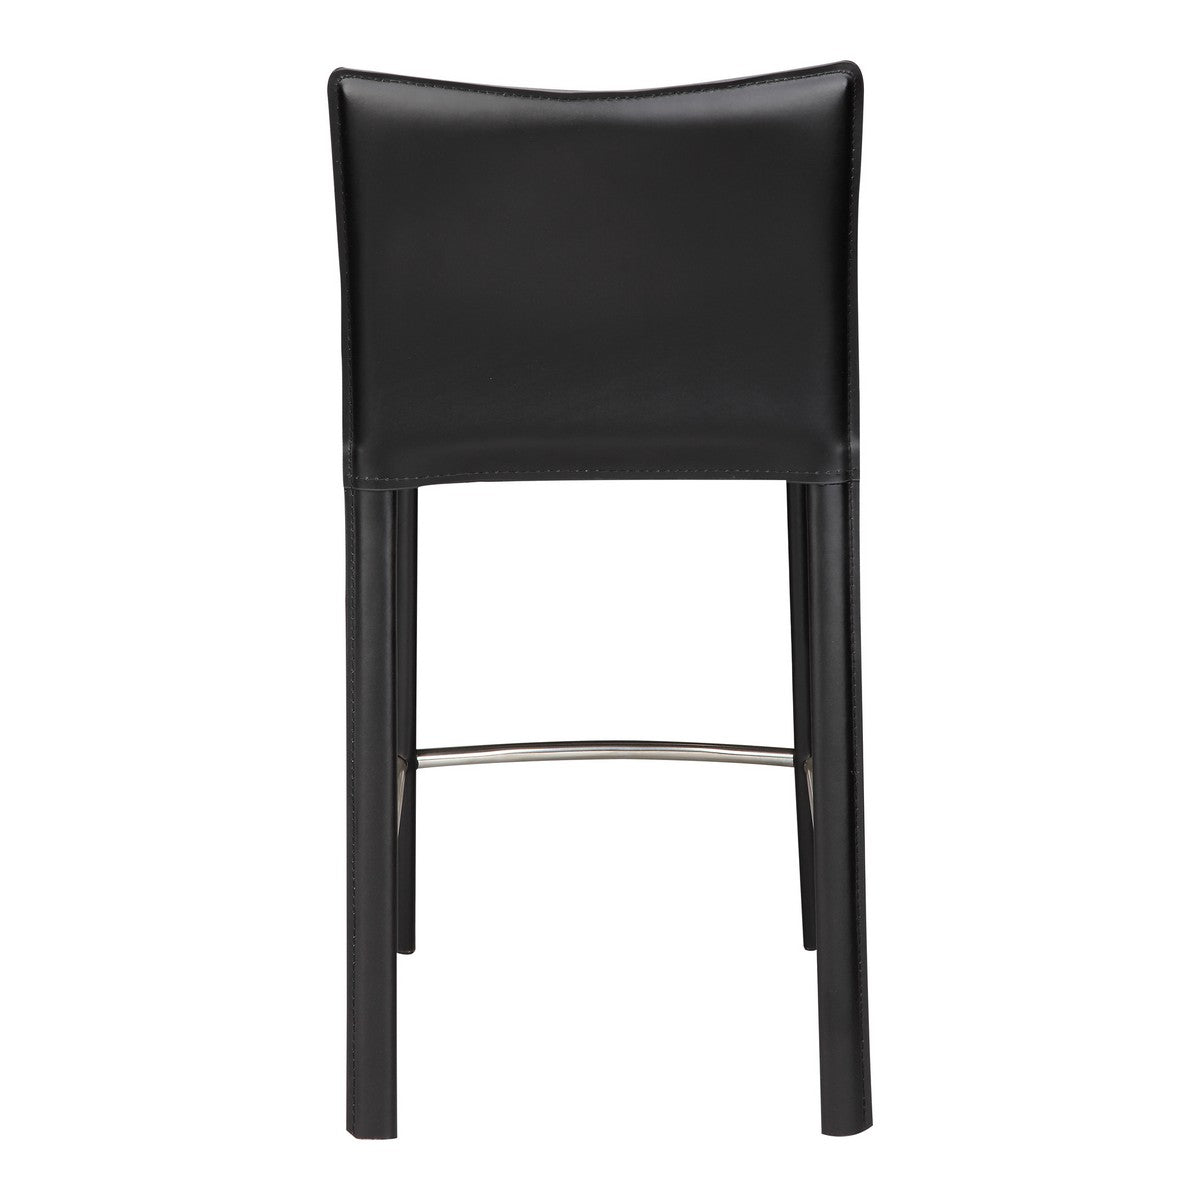 Moe's Home Collection Panca Counter Stool 26" Black - EH-1034-02